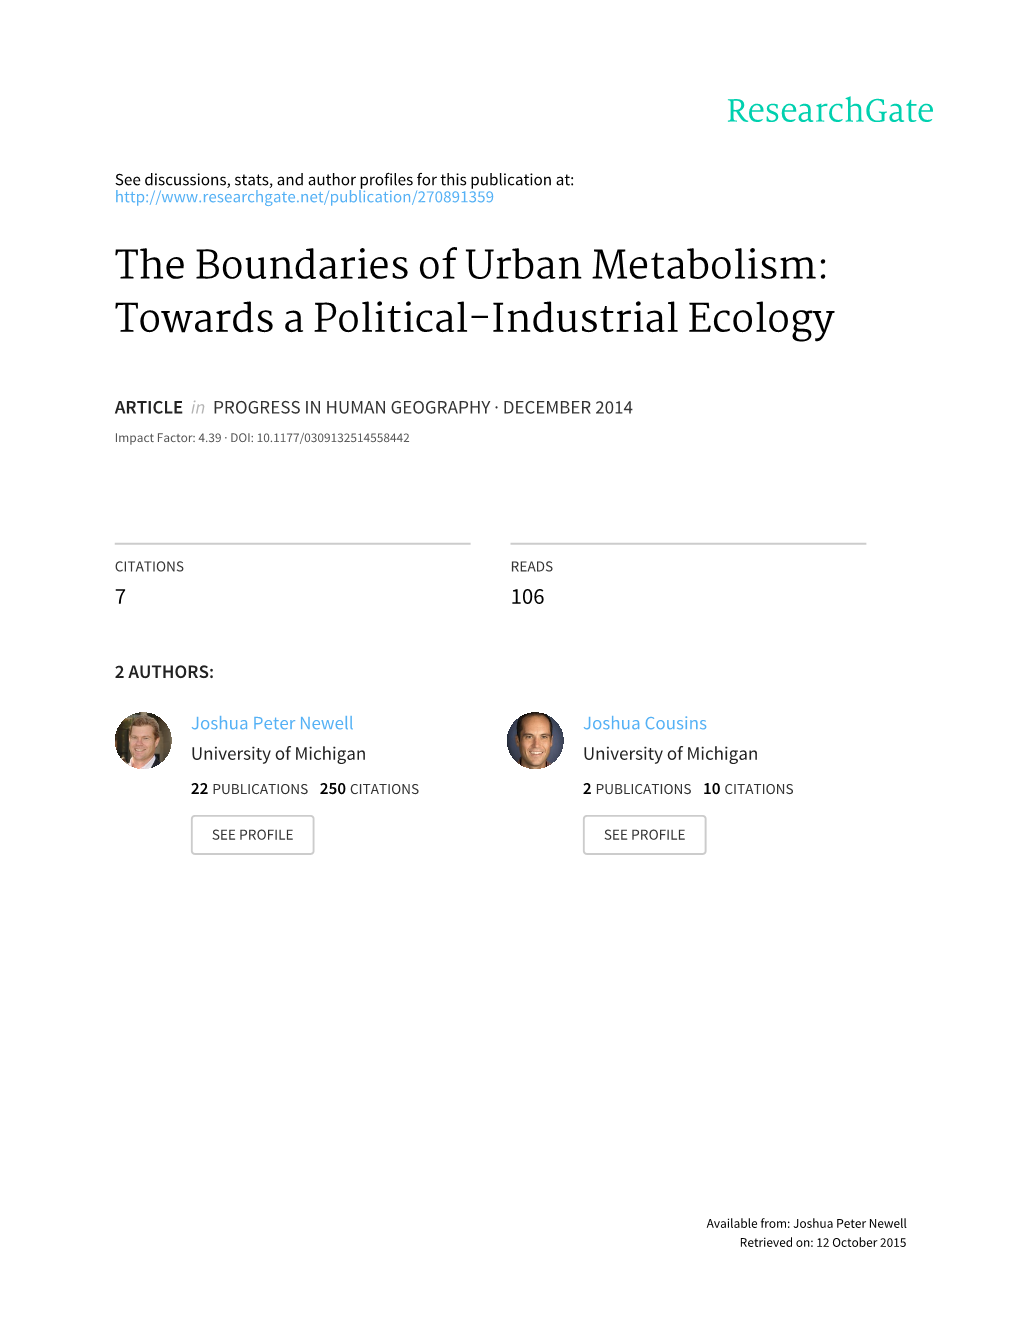 The Boundaries of Urban Metabolism: Towards a Political-Industrial Ecology